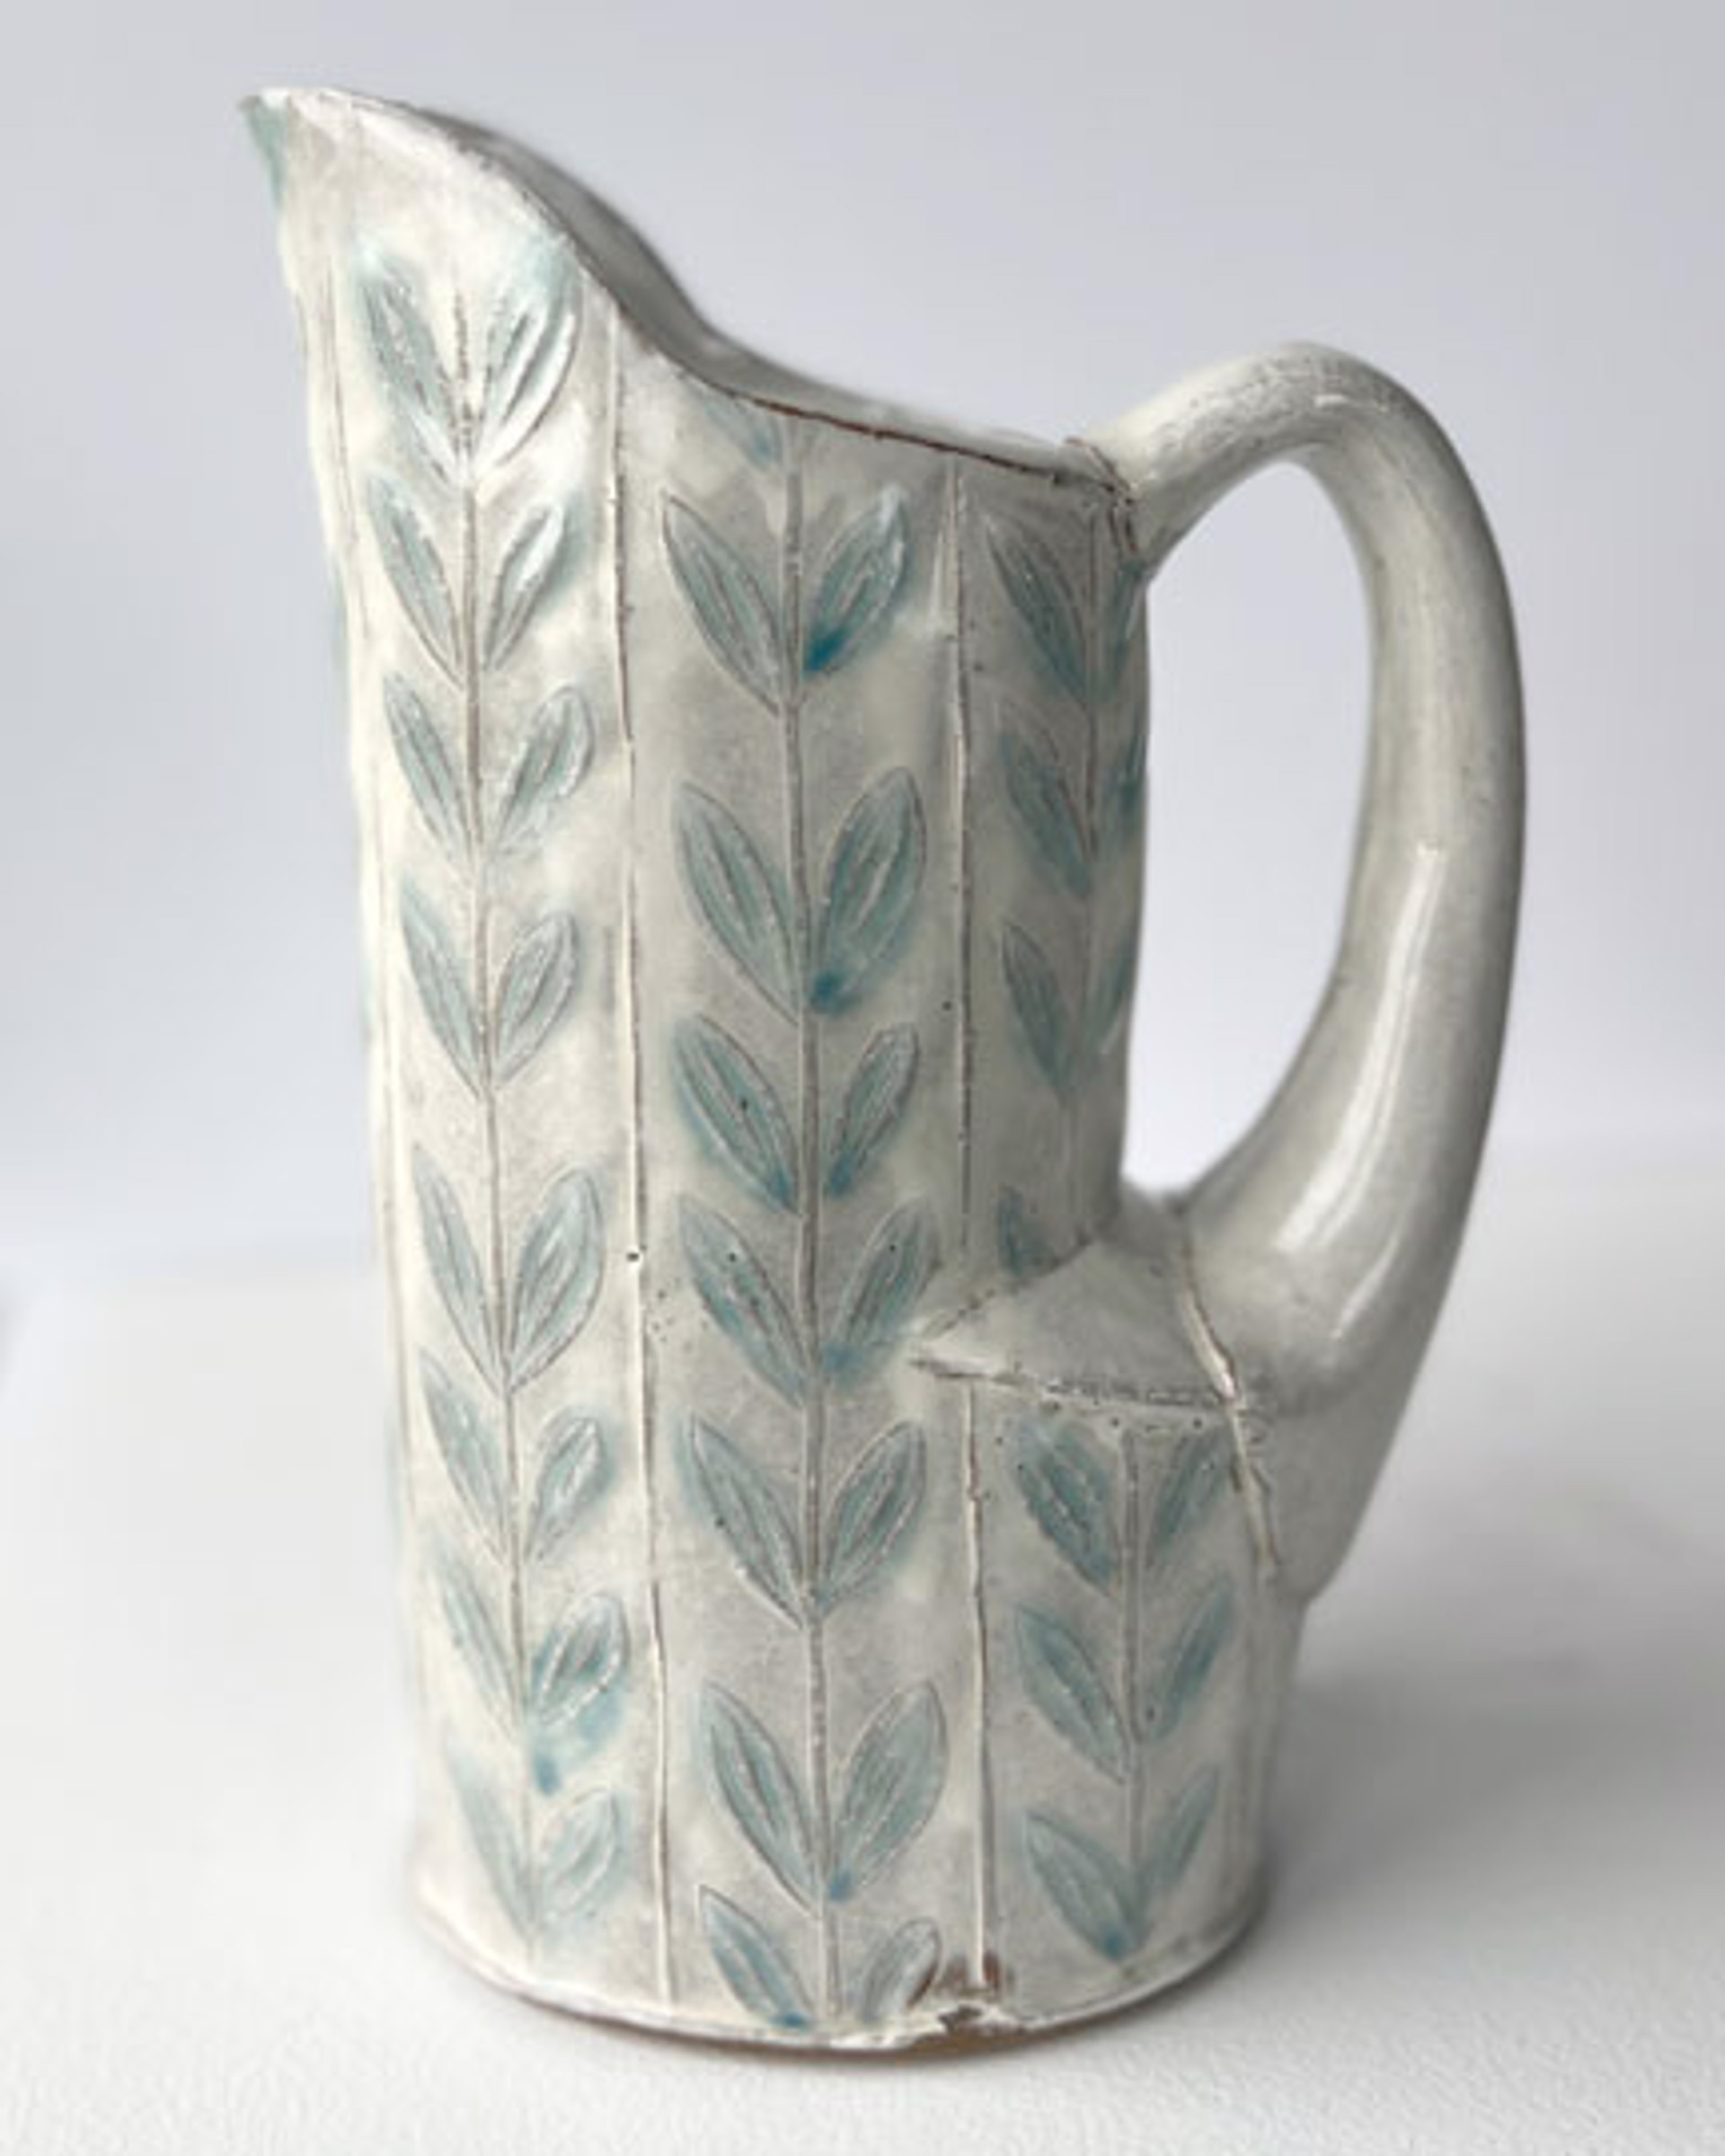 Pitcher with Aqua Leaves by Jennifer Allen